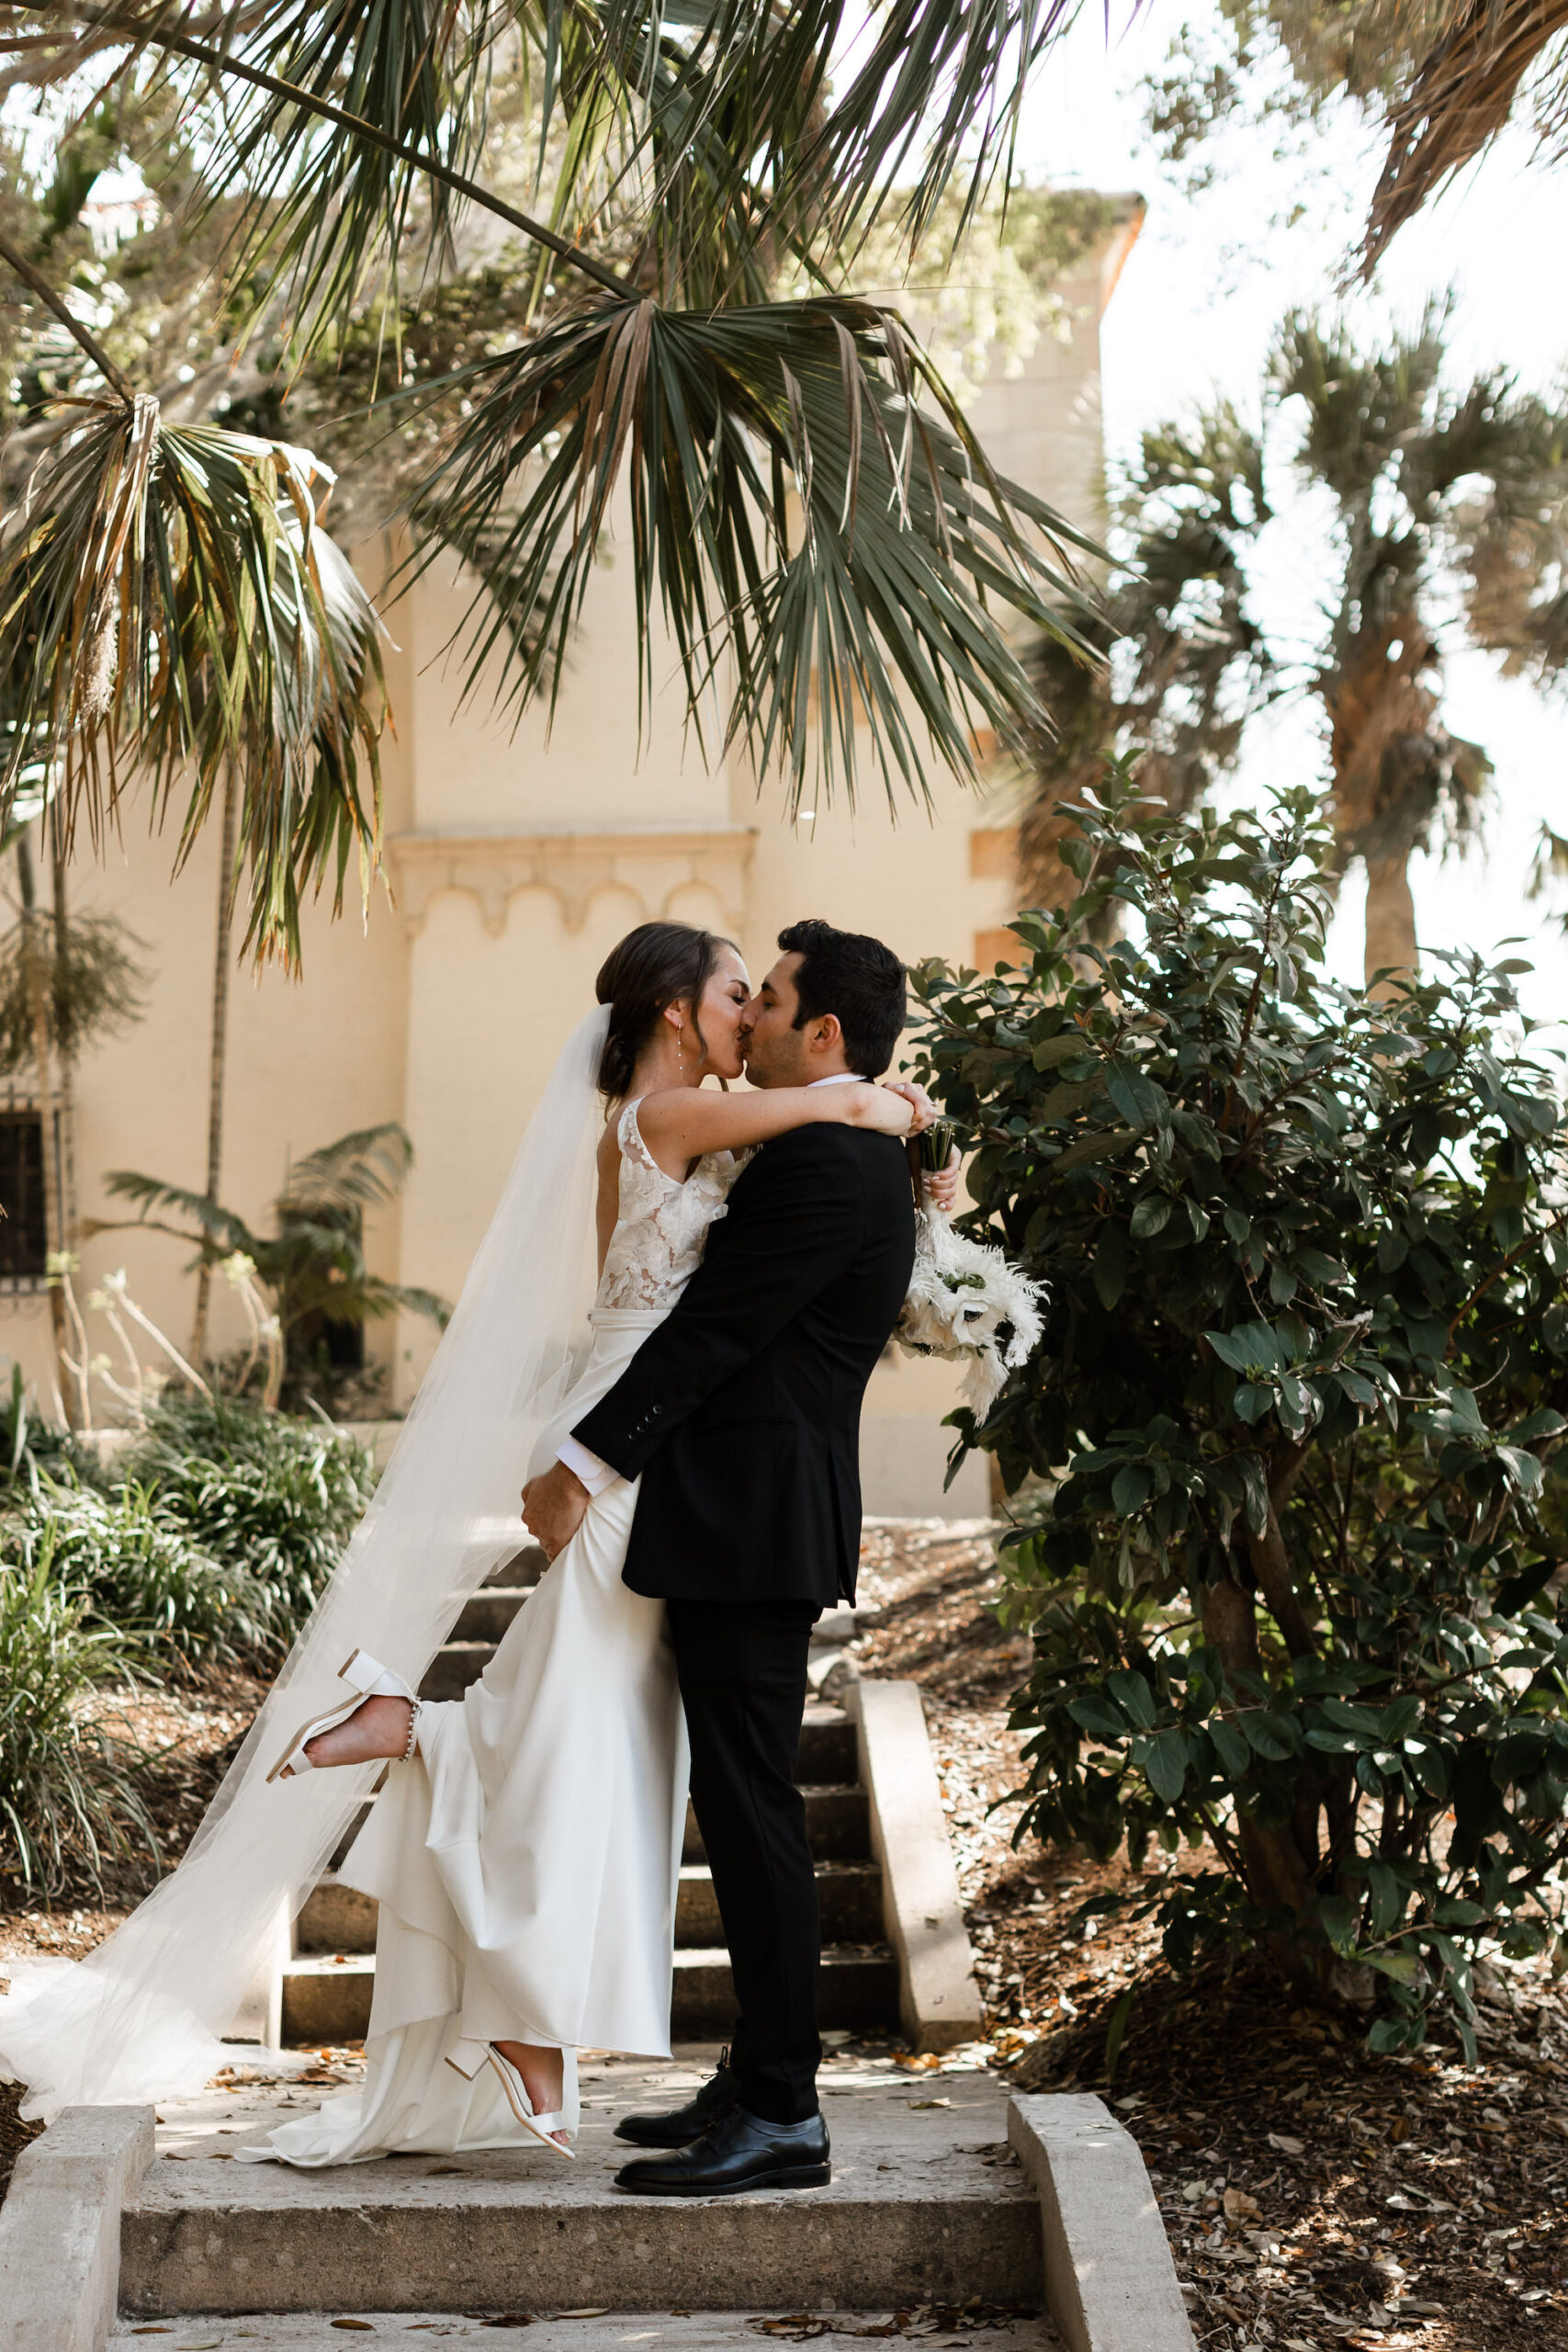 Intimate Bride and Groom Wedding Portrait | Sarasota Photographer Garry and Stacy Photography Co.